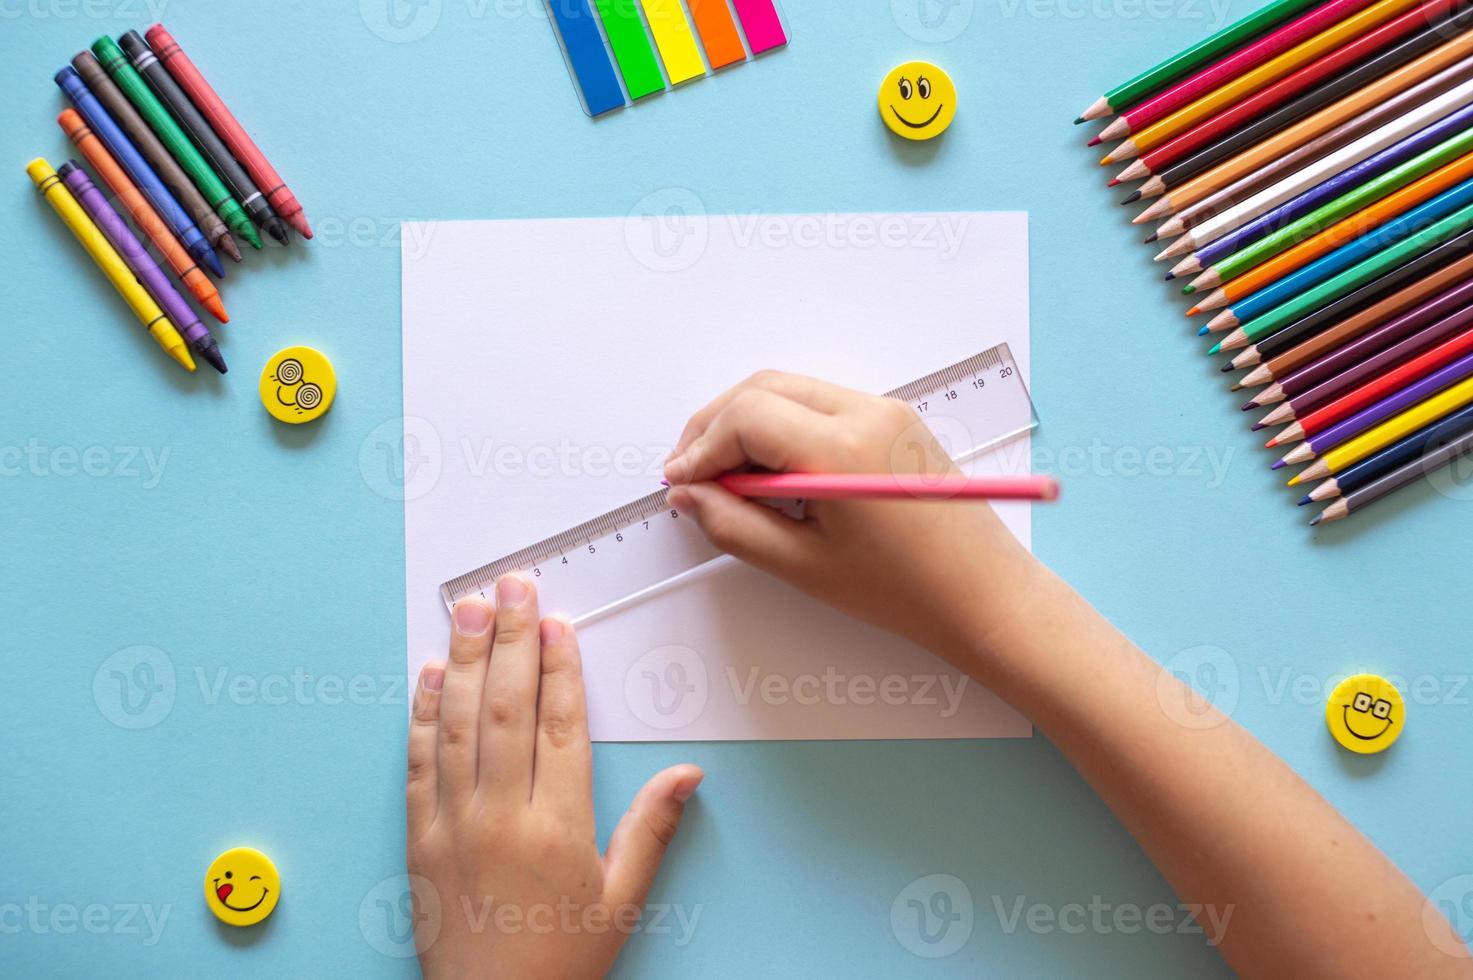 A set of bright stationery on a blue background. Hands holding a ruler photo